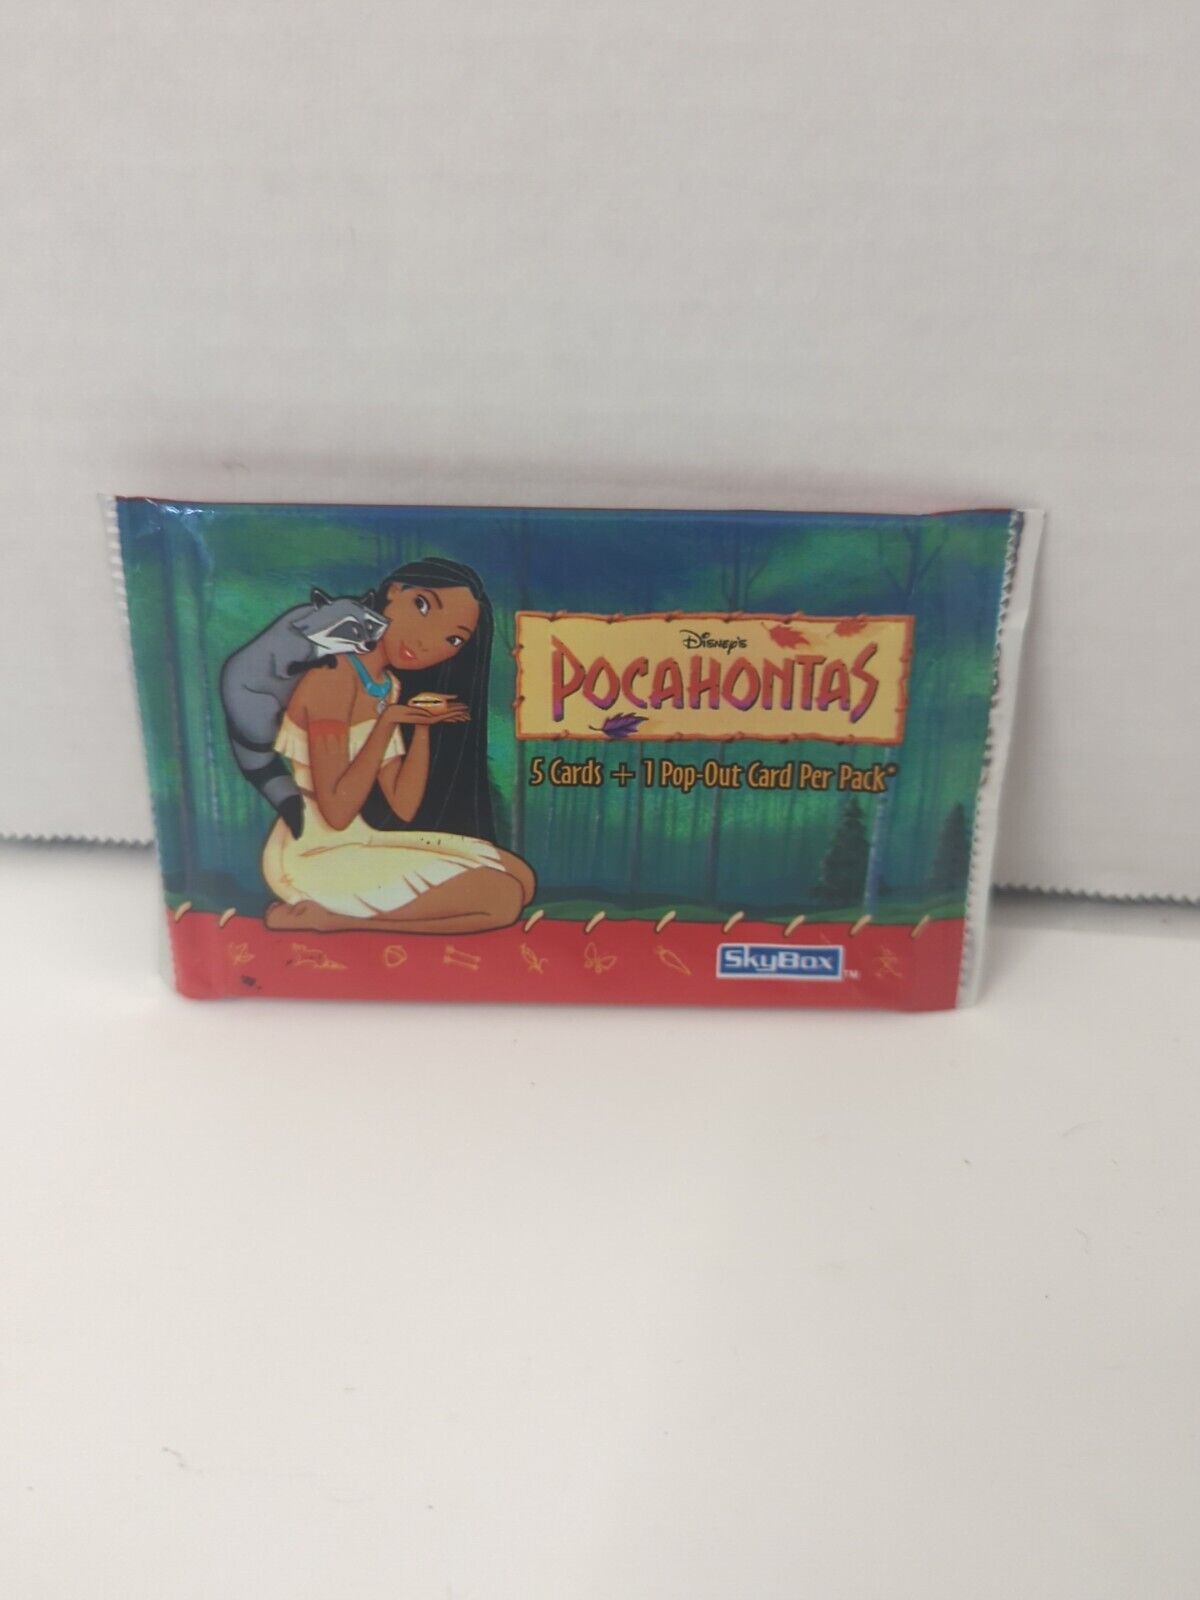 Disney Pocahontas 1995 Skybox Trading Card Pack 5 Cards + 1 Pop-Out Per Pack New